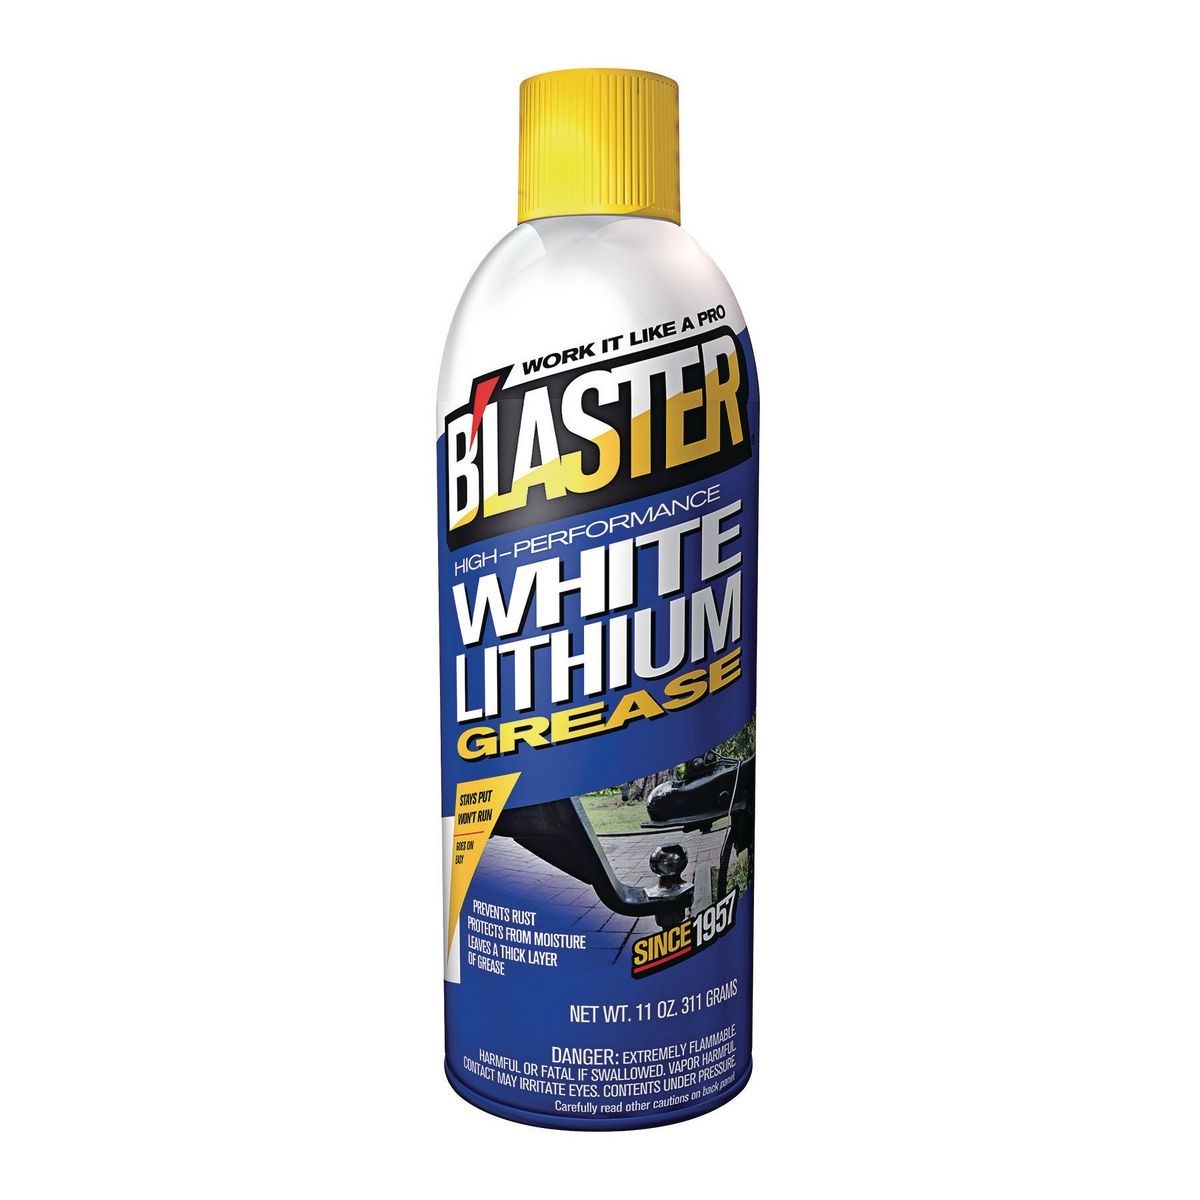 B'LASTER High Performance White Lithium Grease